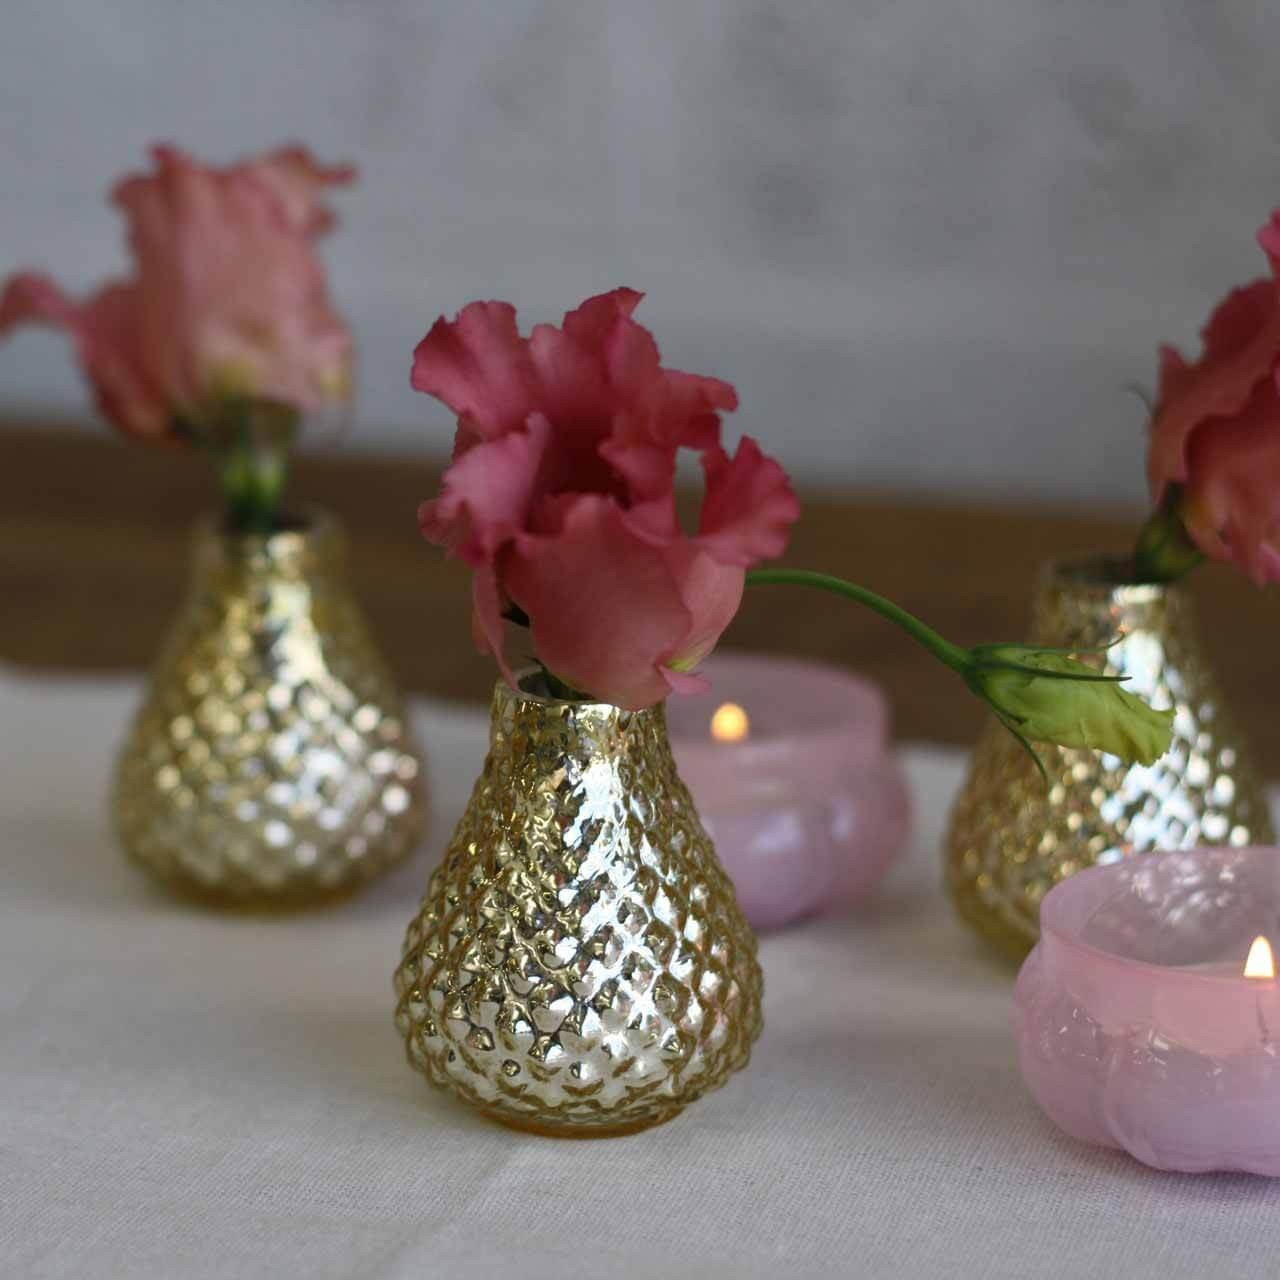 22 Recommended Little Bud Vases 2024 free download little bud vases of tiny bud vase www topsimages com in tiny gold bud vases set of the wedding of dreams jpg 1280x1280 tiny bud vase